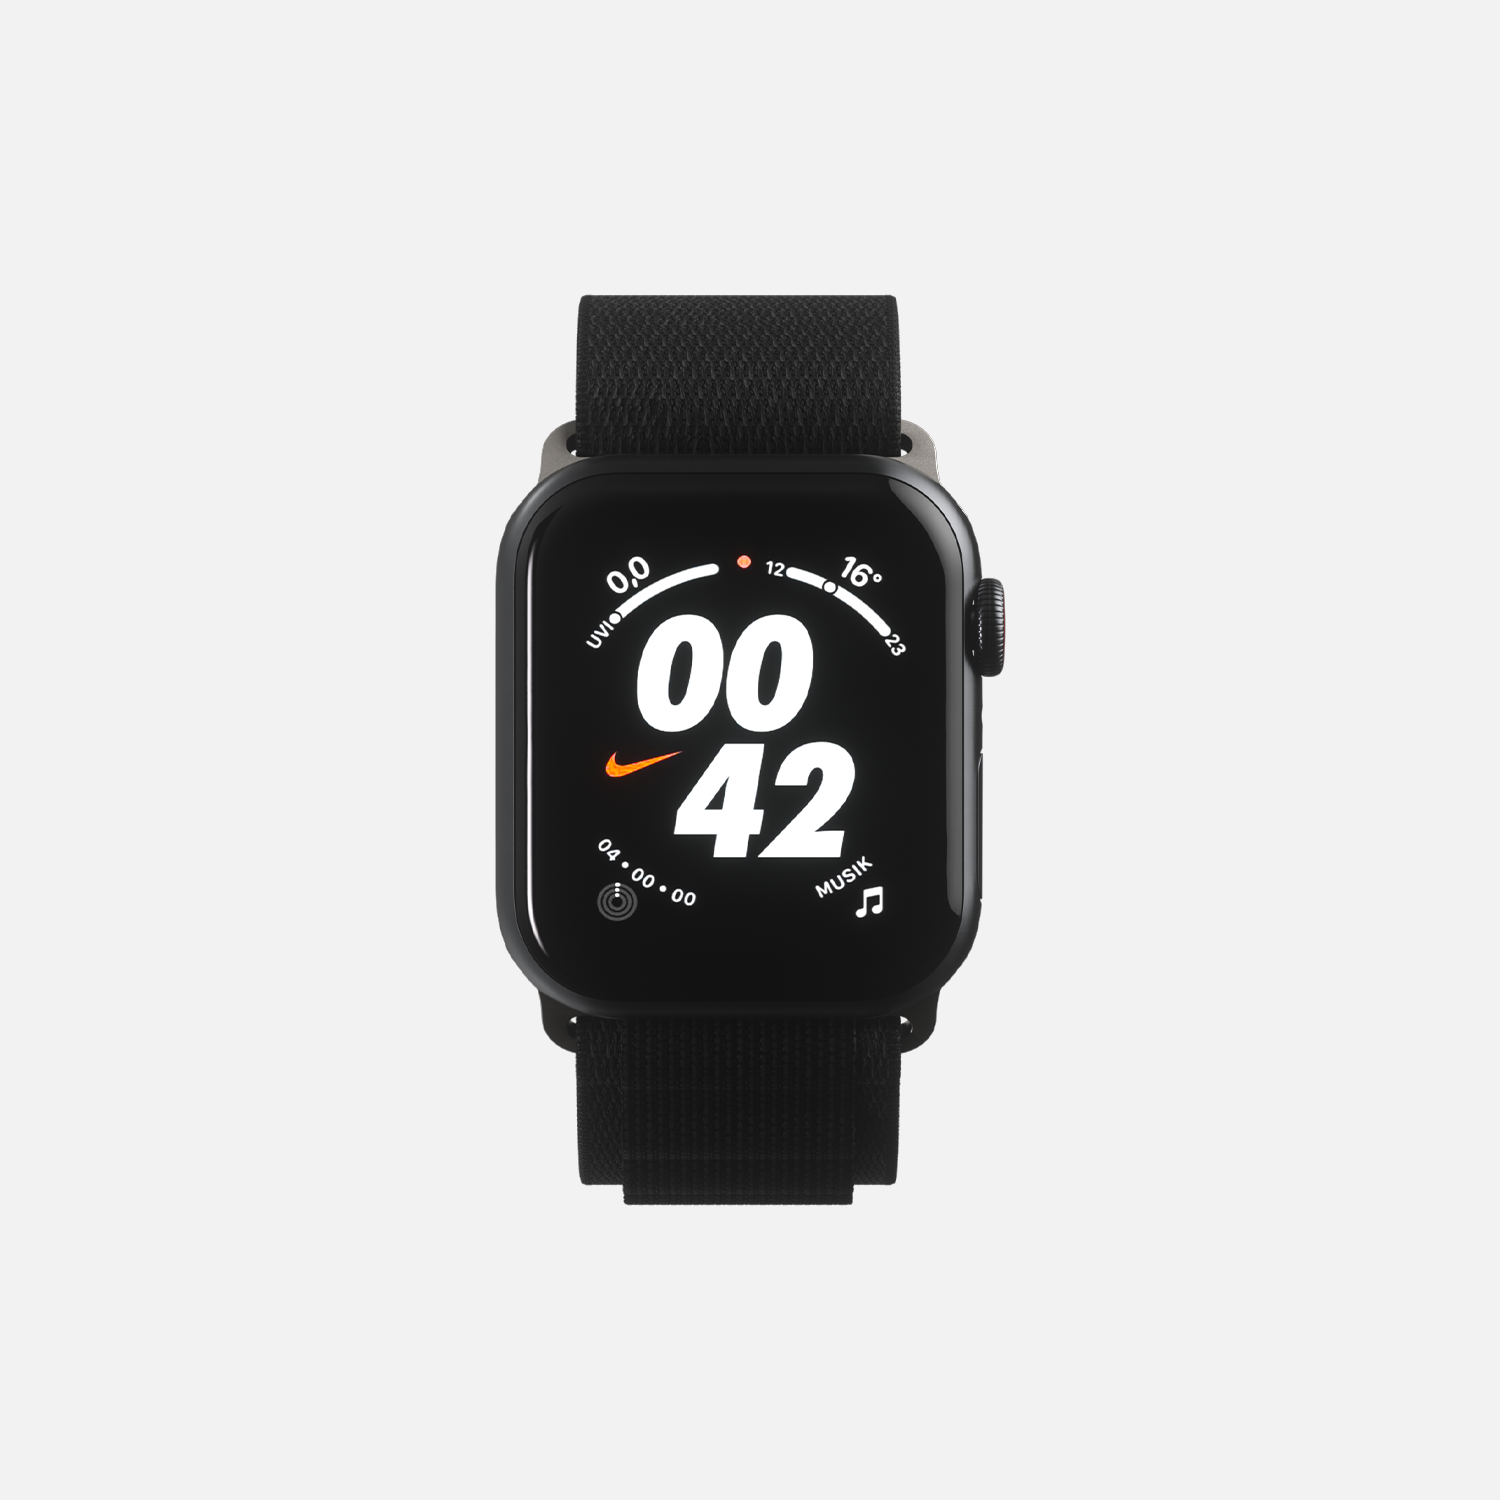 Black smartwatch with Nike logo, displaying time and music icon on a white background.